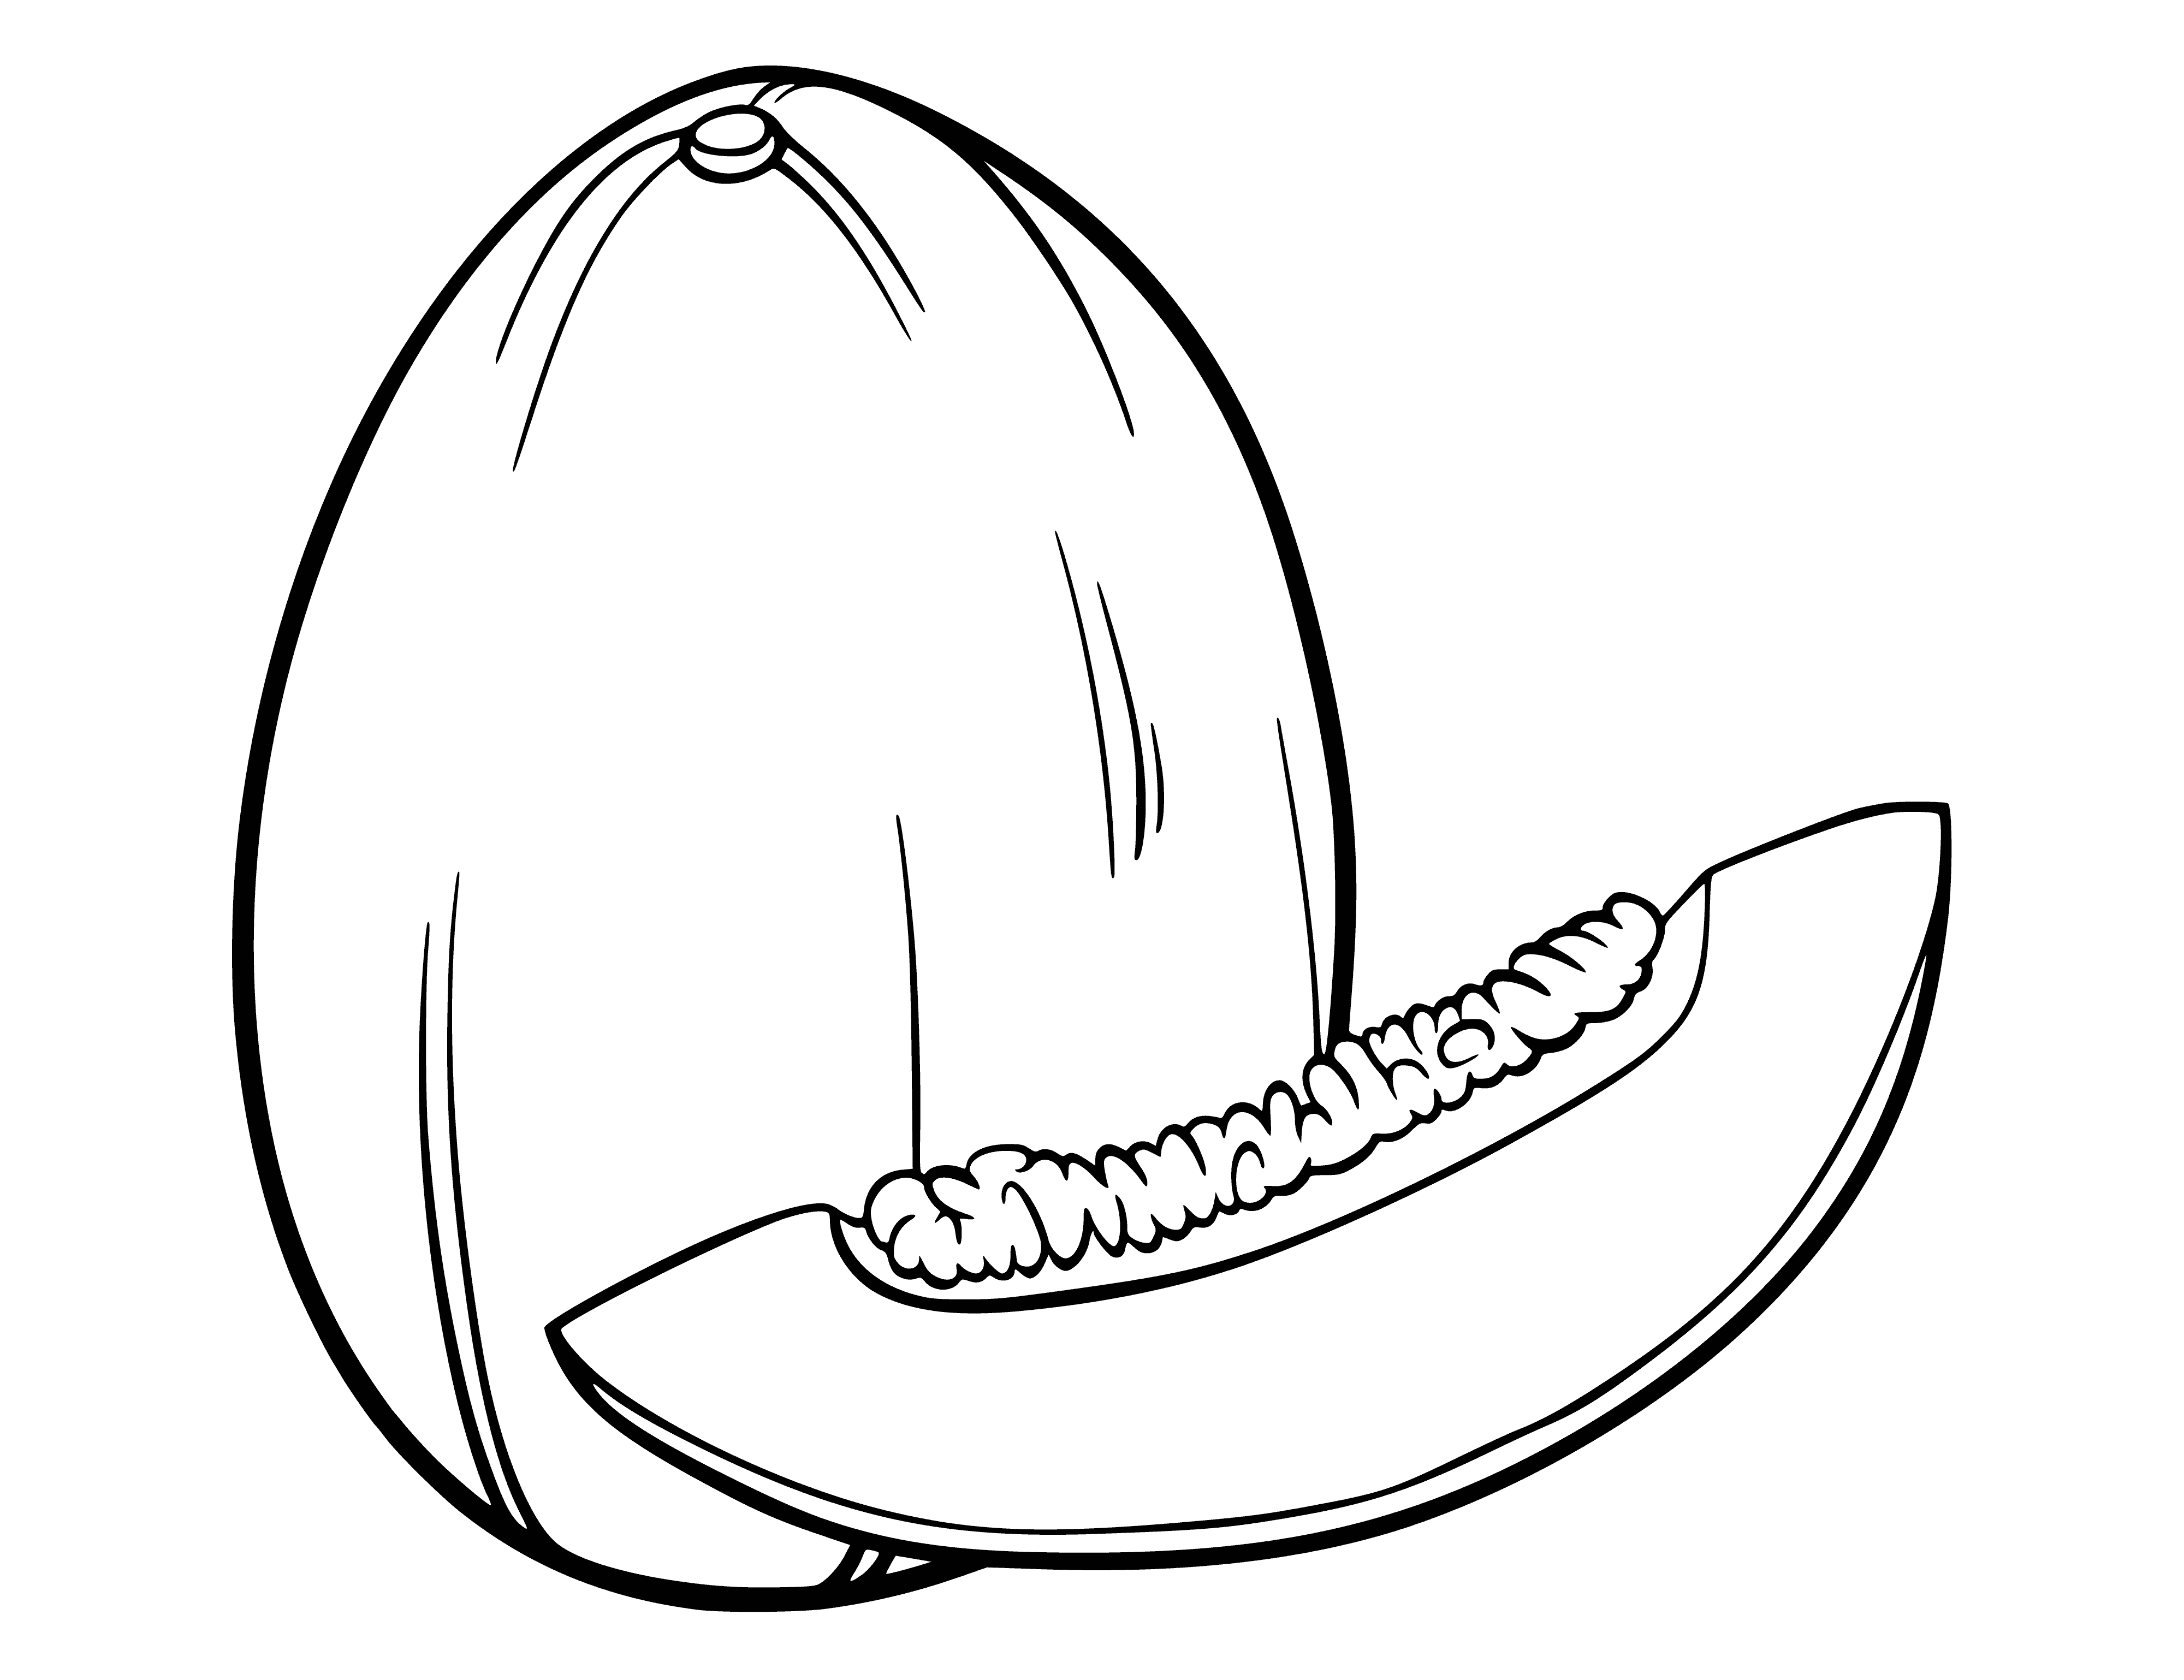 coloring page: Half of a green melon filled with orange seeds. Smooth/bumpy, topped with a green leaf.